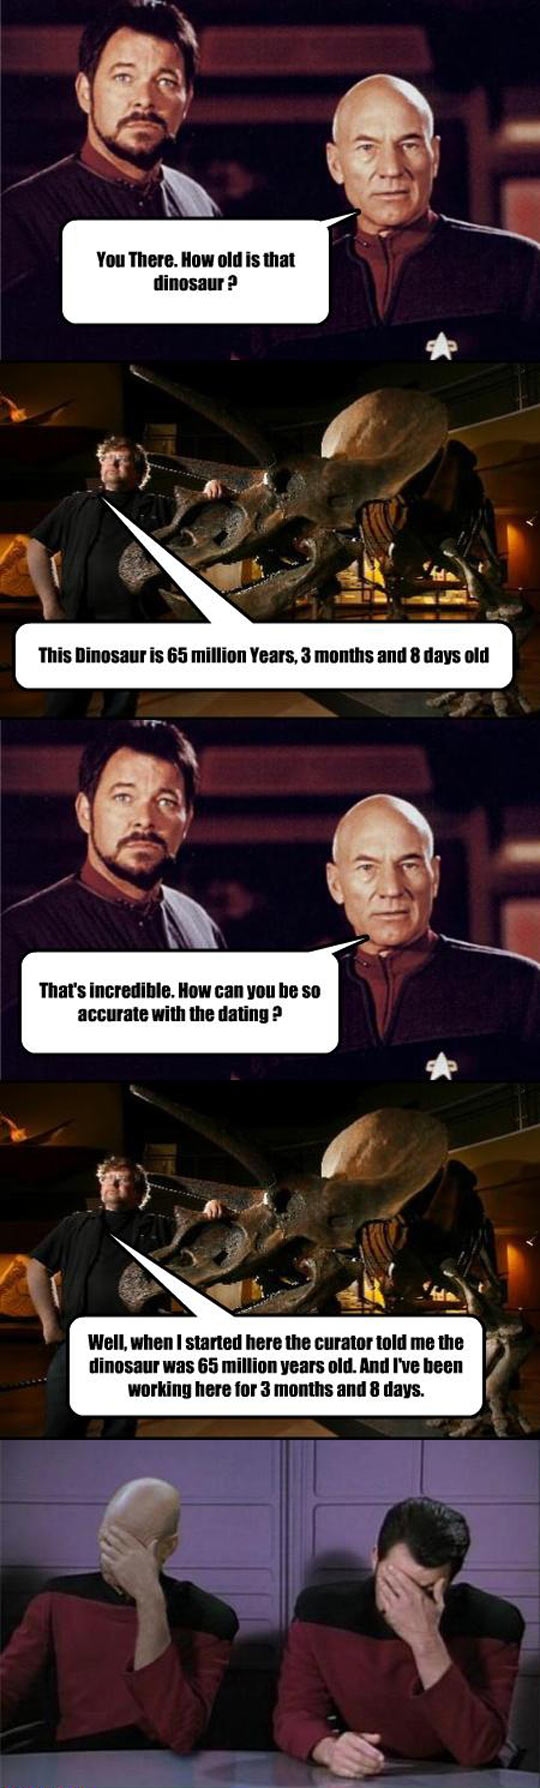 How old is that dinosaur?